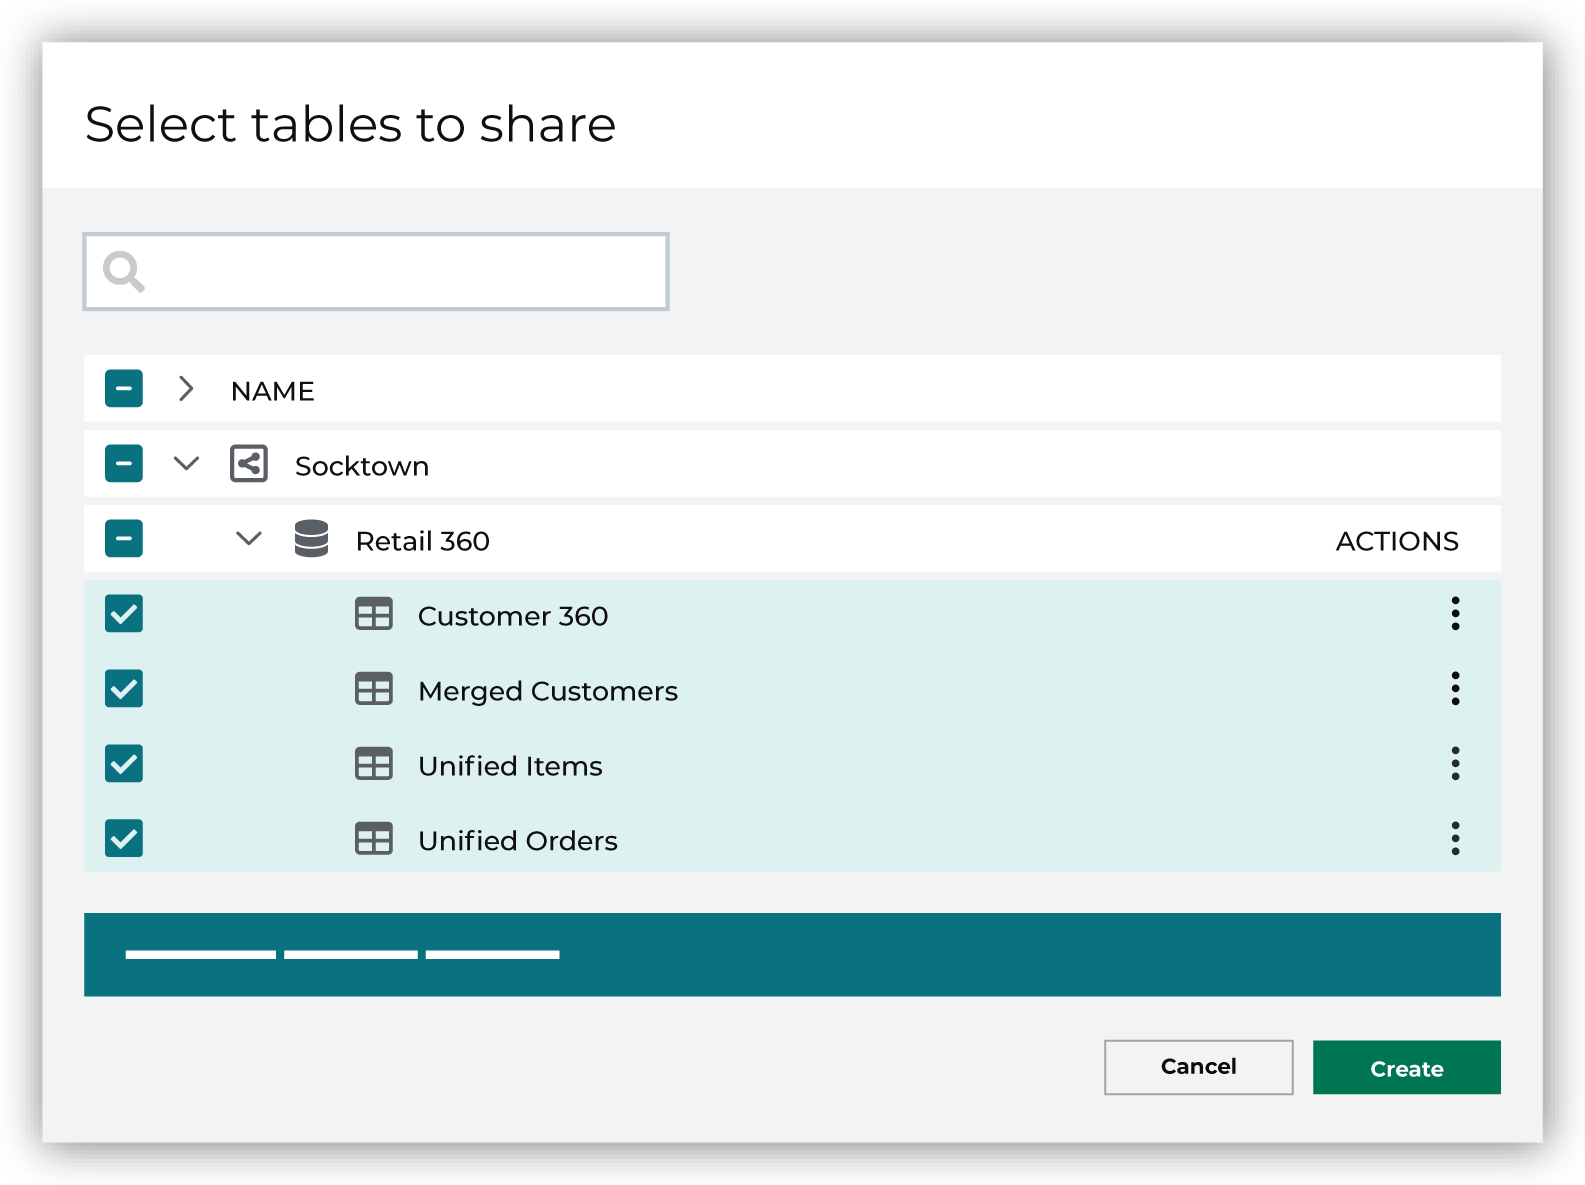 Select schemas and tables to be shared.